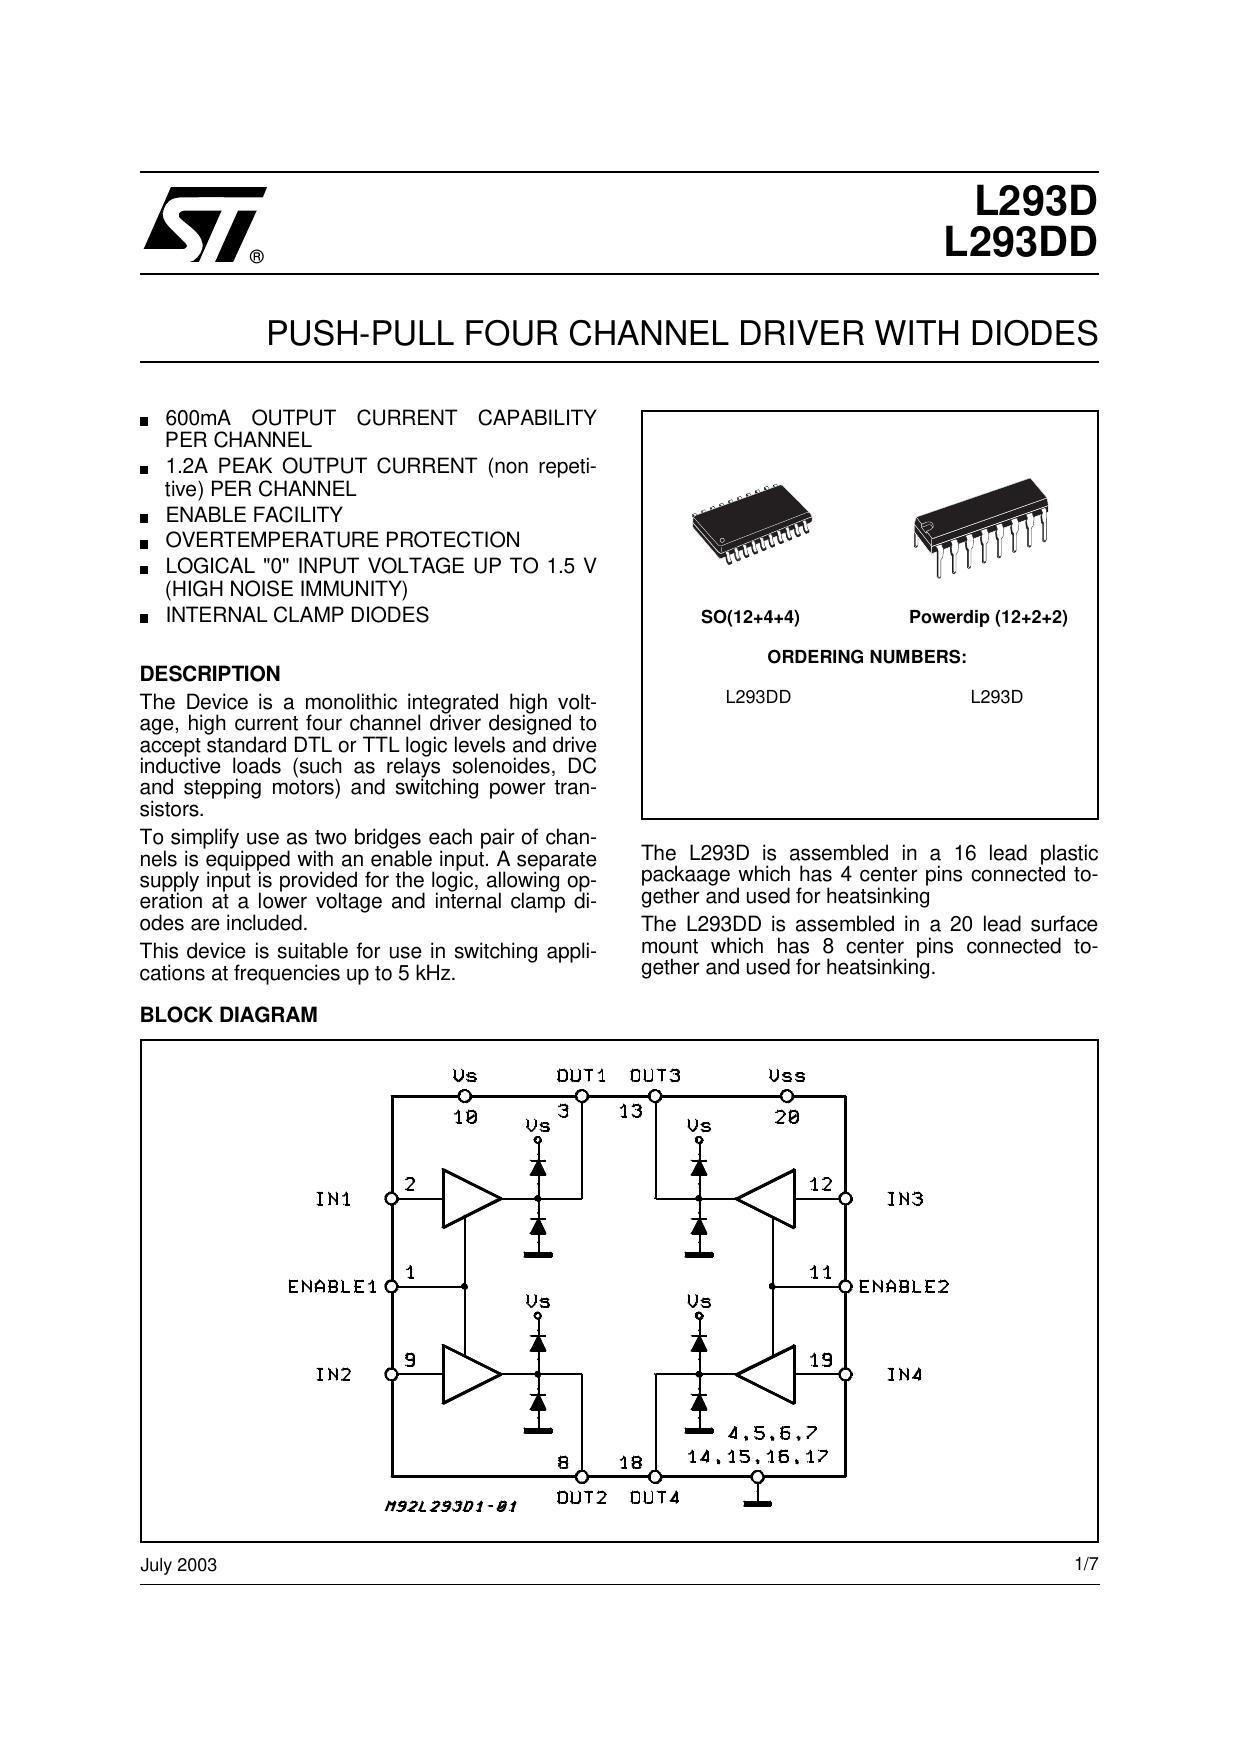 l293d-l293dd-push-pull-four-channel-driver-with-diodes.pdf